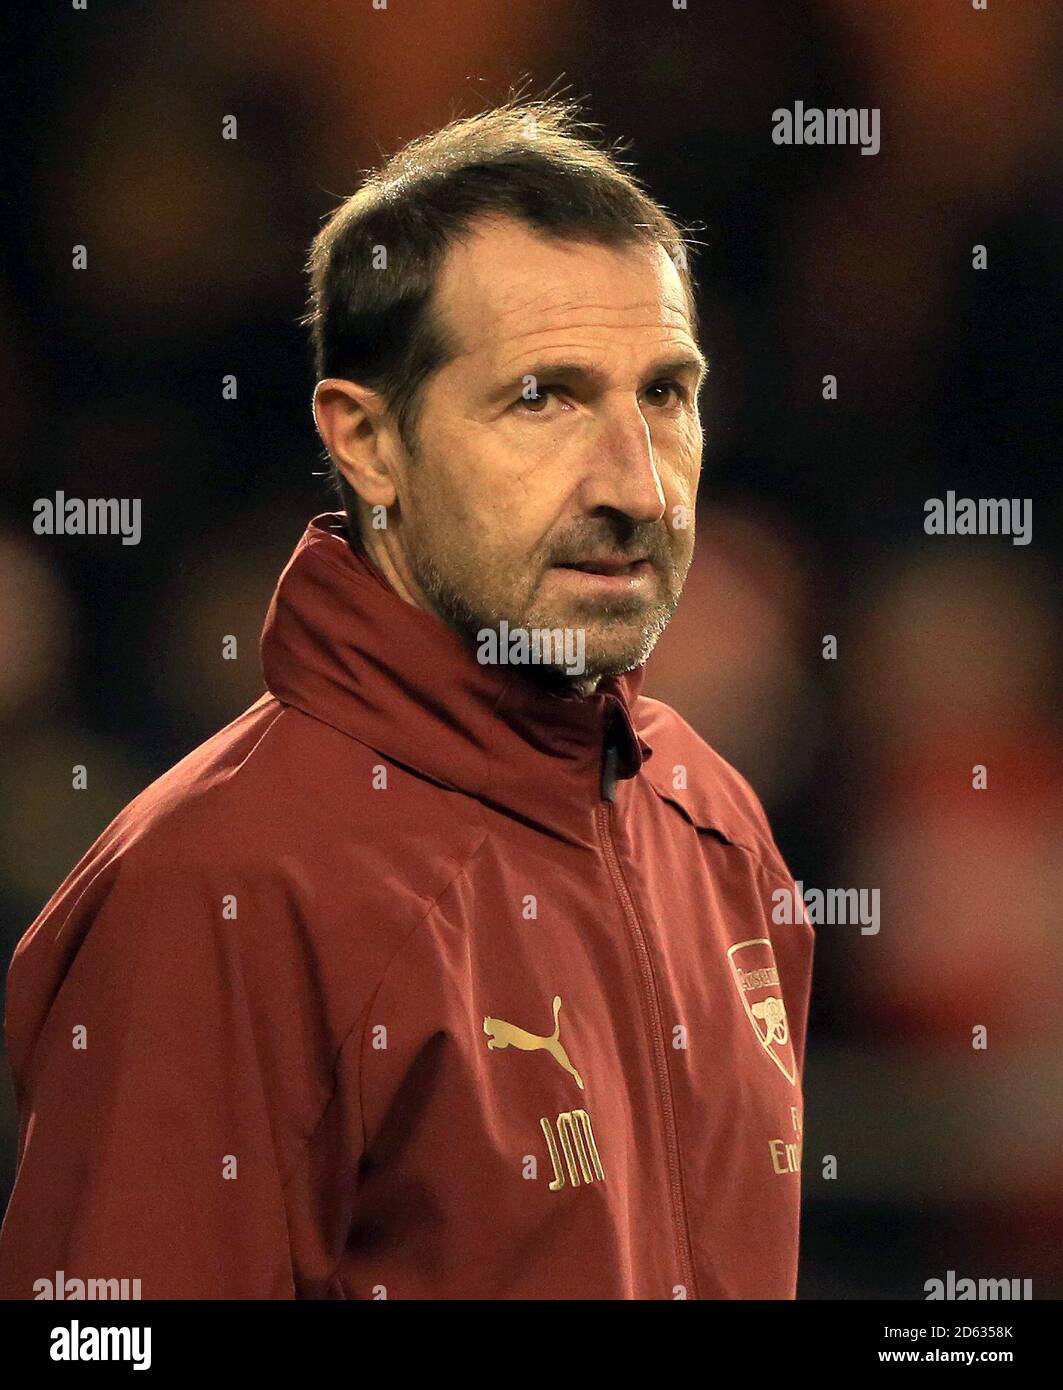 Arsenal's Strength and Conditioning Coach Julen Masach Stock Photo - Alamy